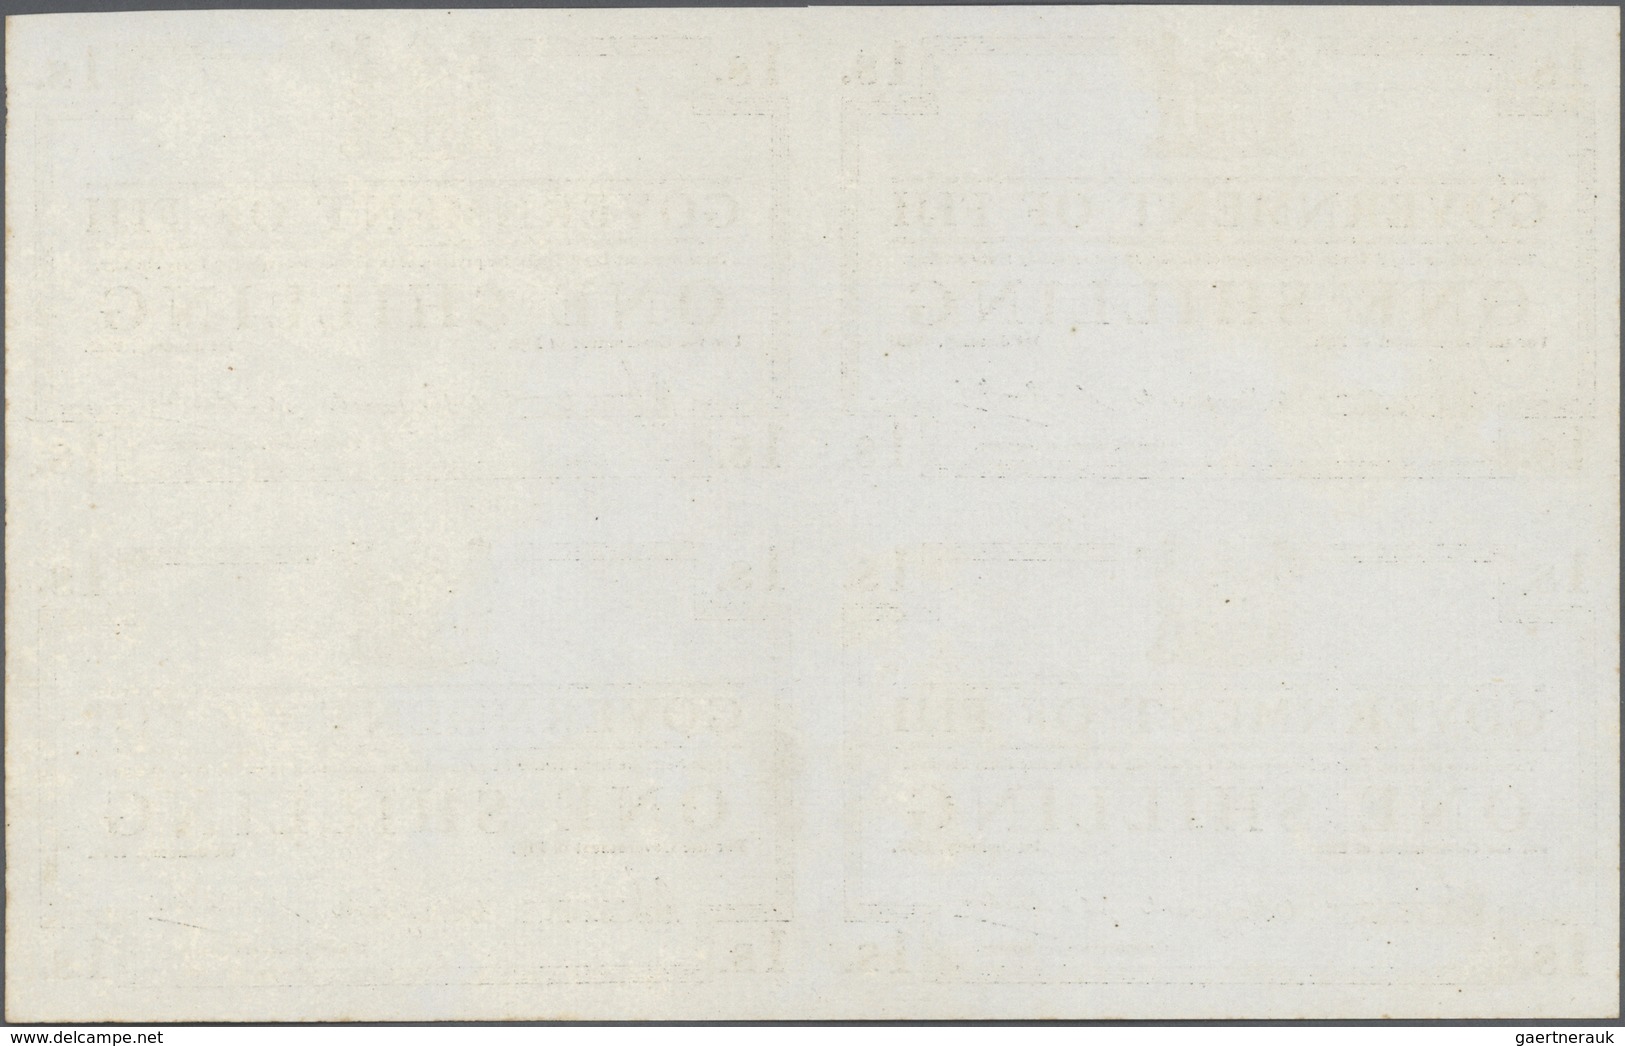 01445 Fiji: Uncut Sheet Of 4 Notes 1 Shilling 1942, P.49a With A Few Brownish Spots Along The Borders, Oth - Figi